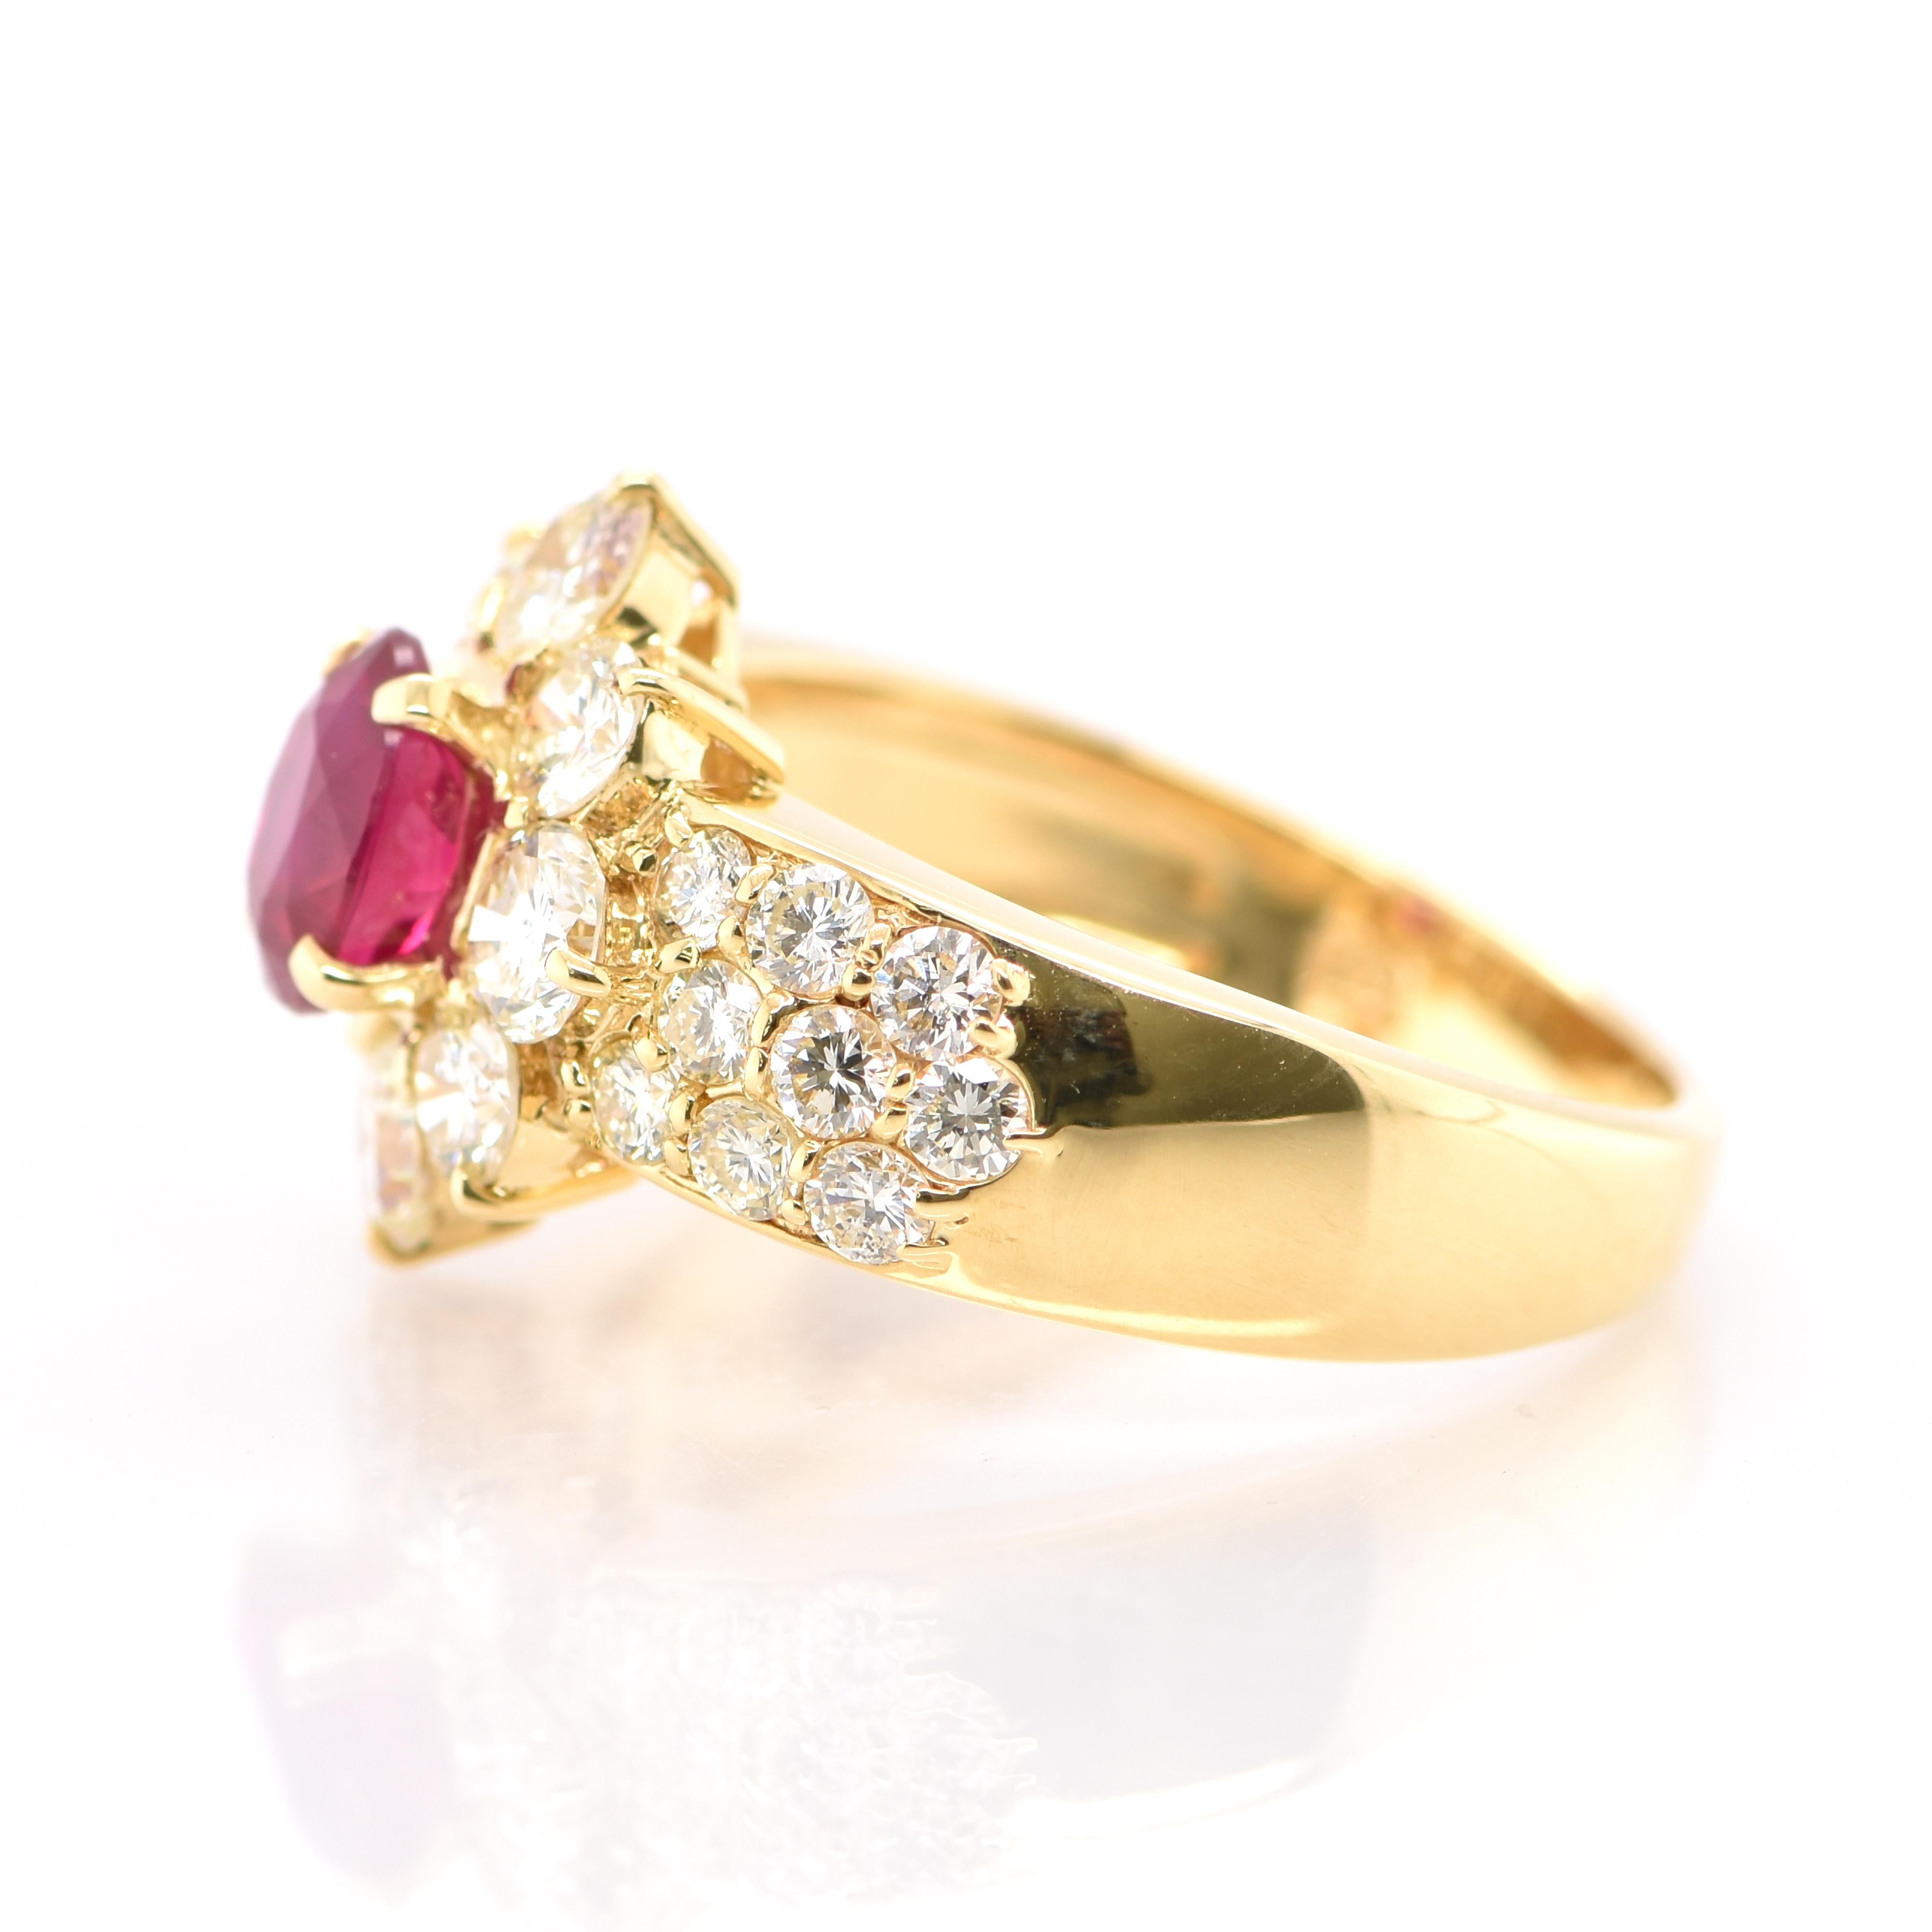 Oval Cut GIA Certified 1.00 Carat Natural Burmese Ruby and Diamond Ring Set in 18K Gold